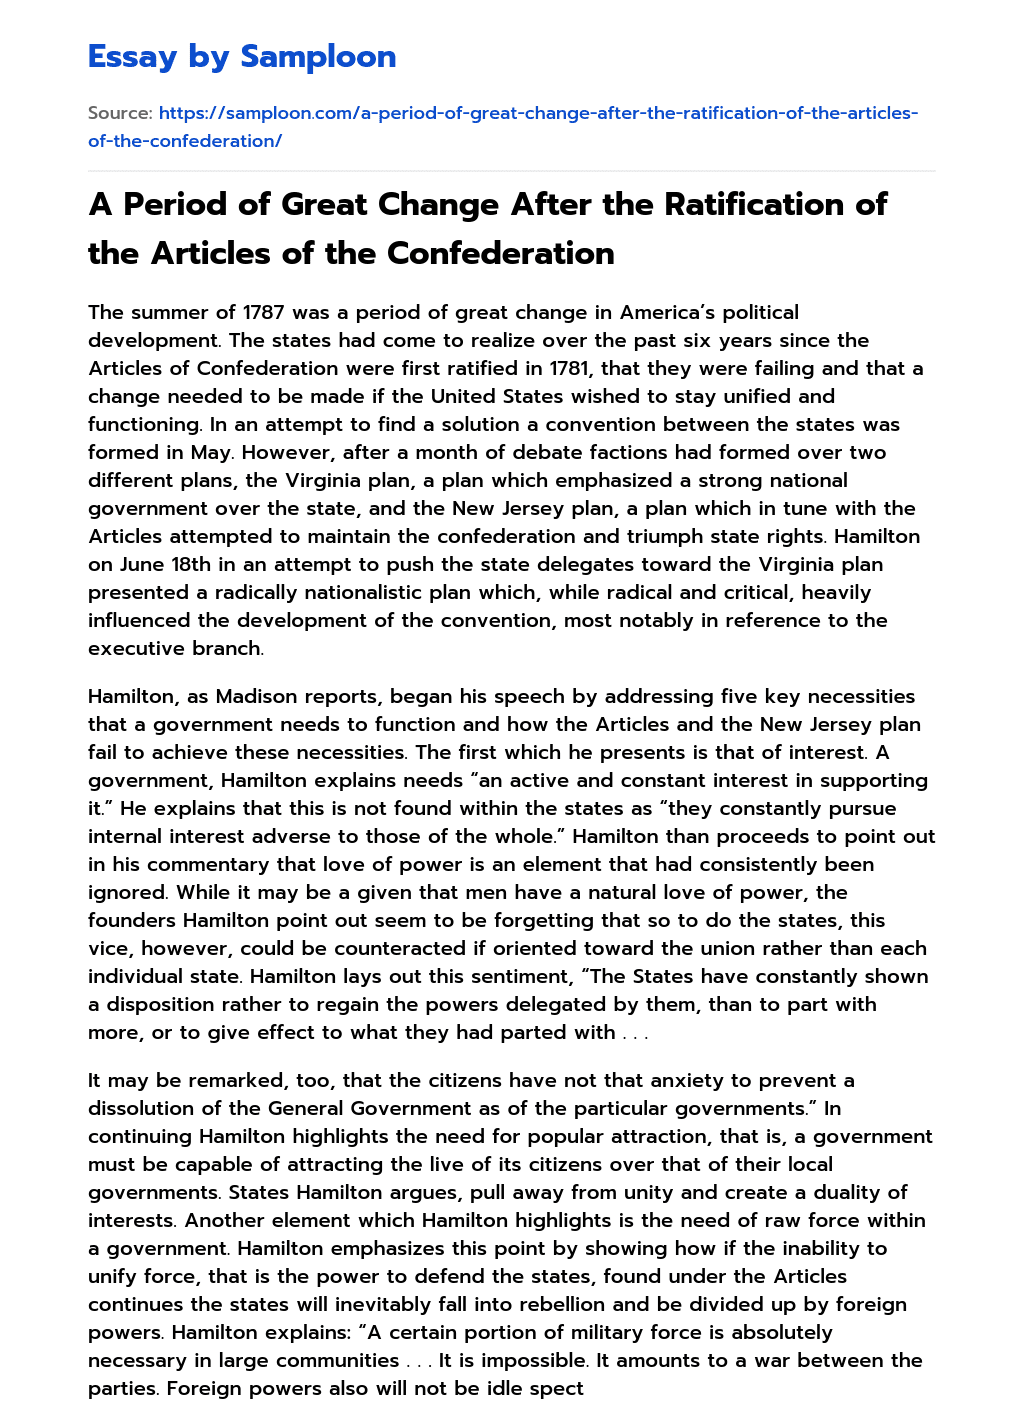 A Period of Great Change After the Ratification of the Articles of the Confederation essay